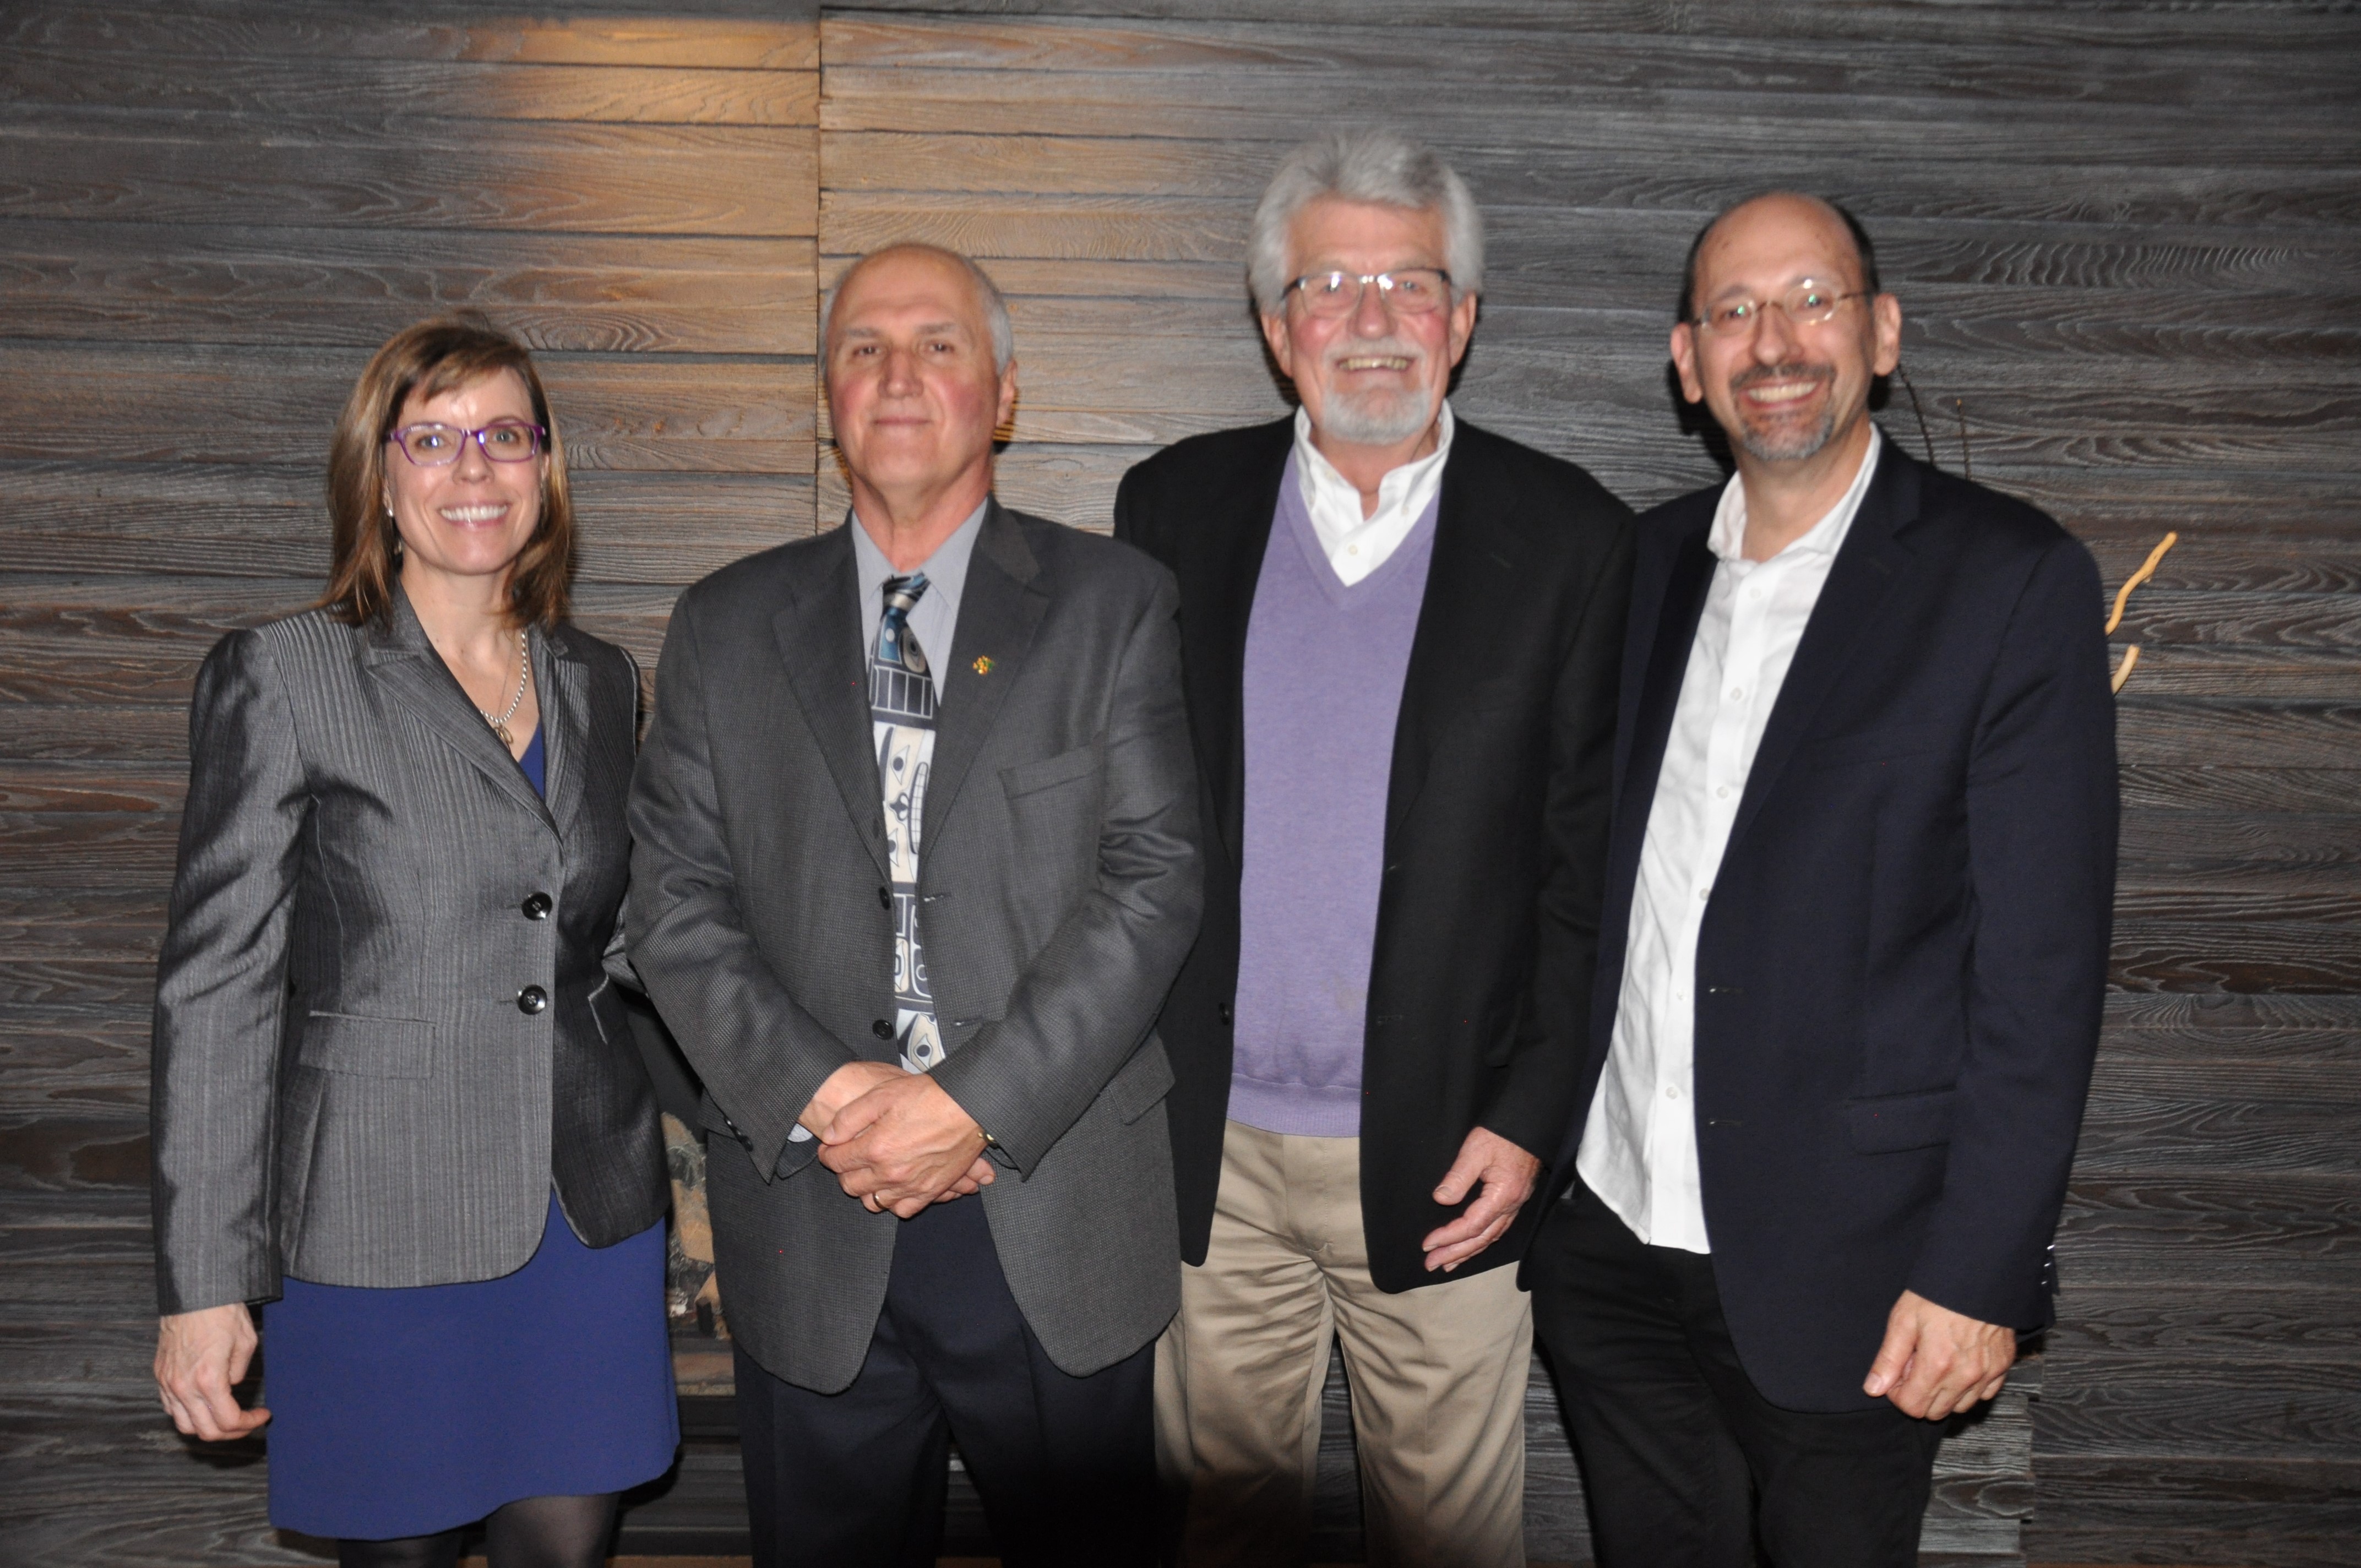 Photo of (from left to right) Marie-France Kingsley, George Myette, Ed McIsaac, and Dr. Ivan Zinger.